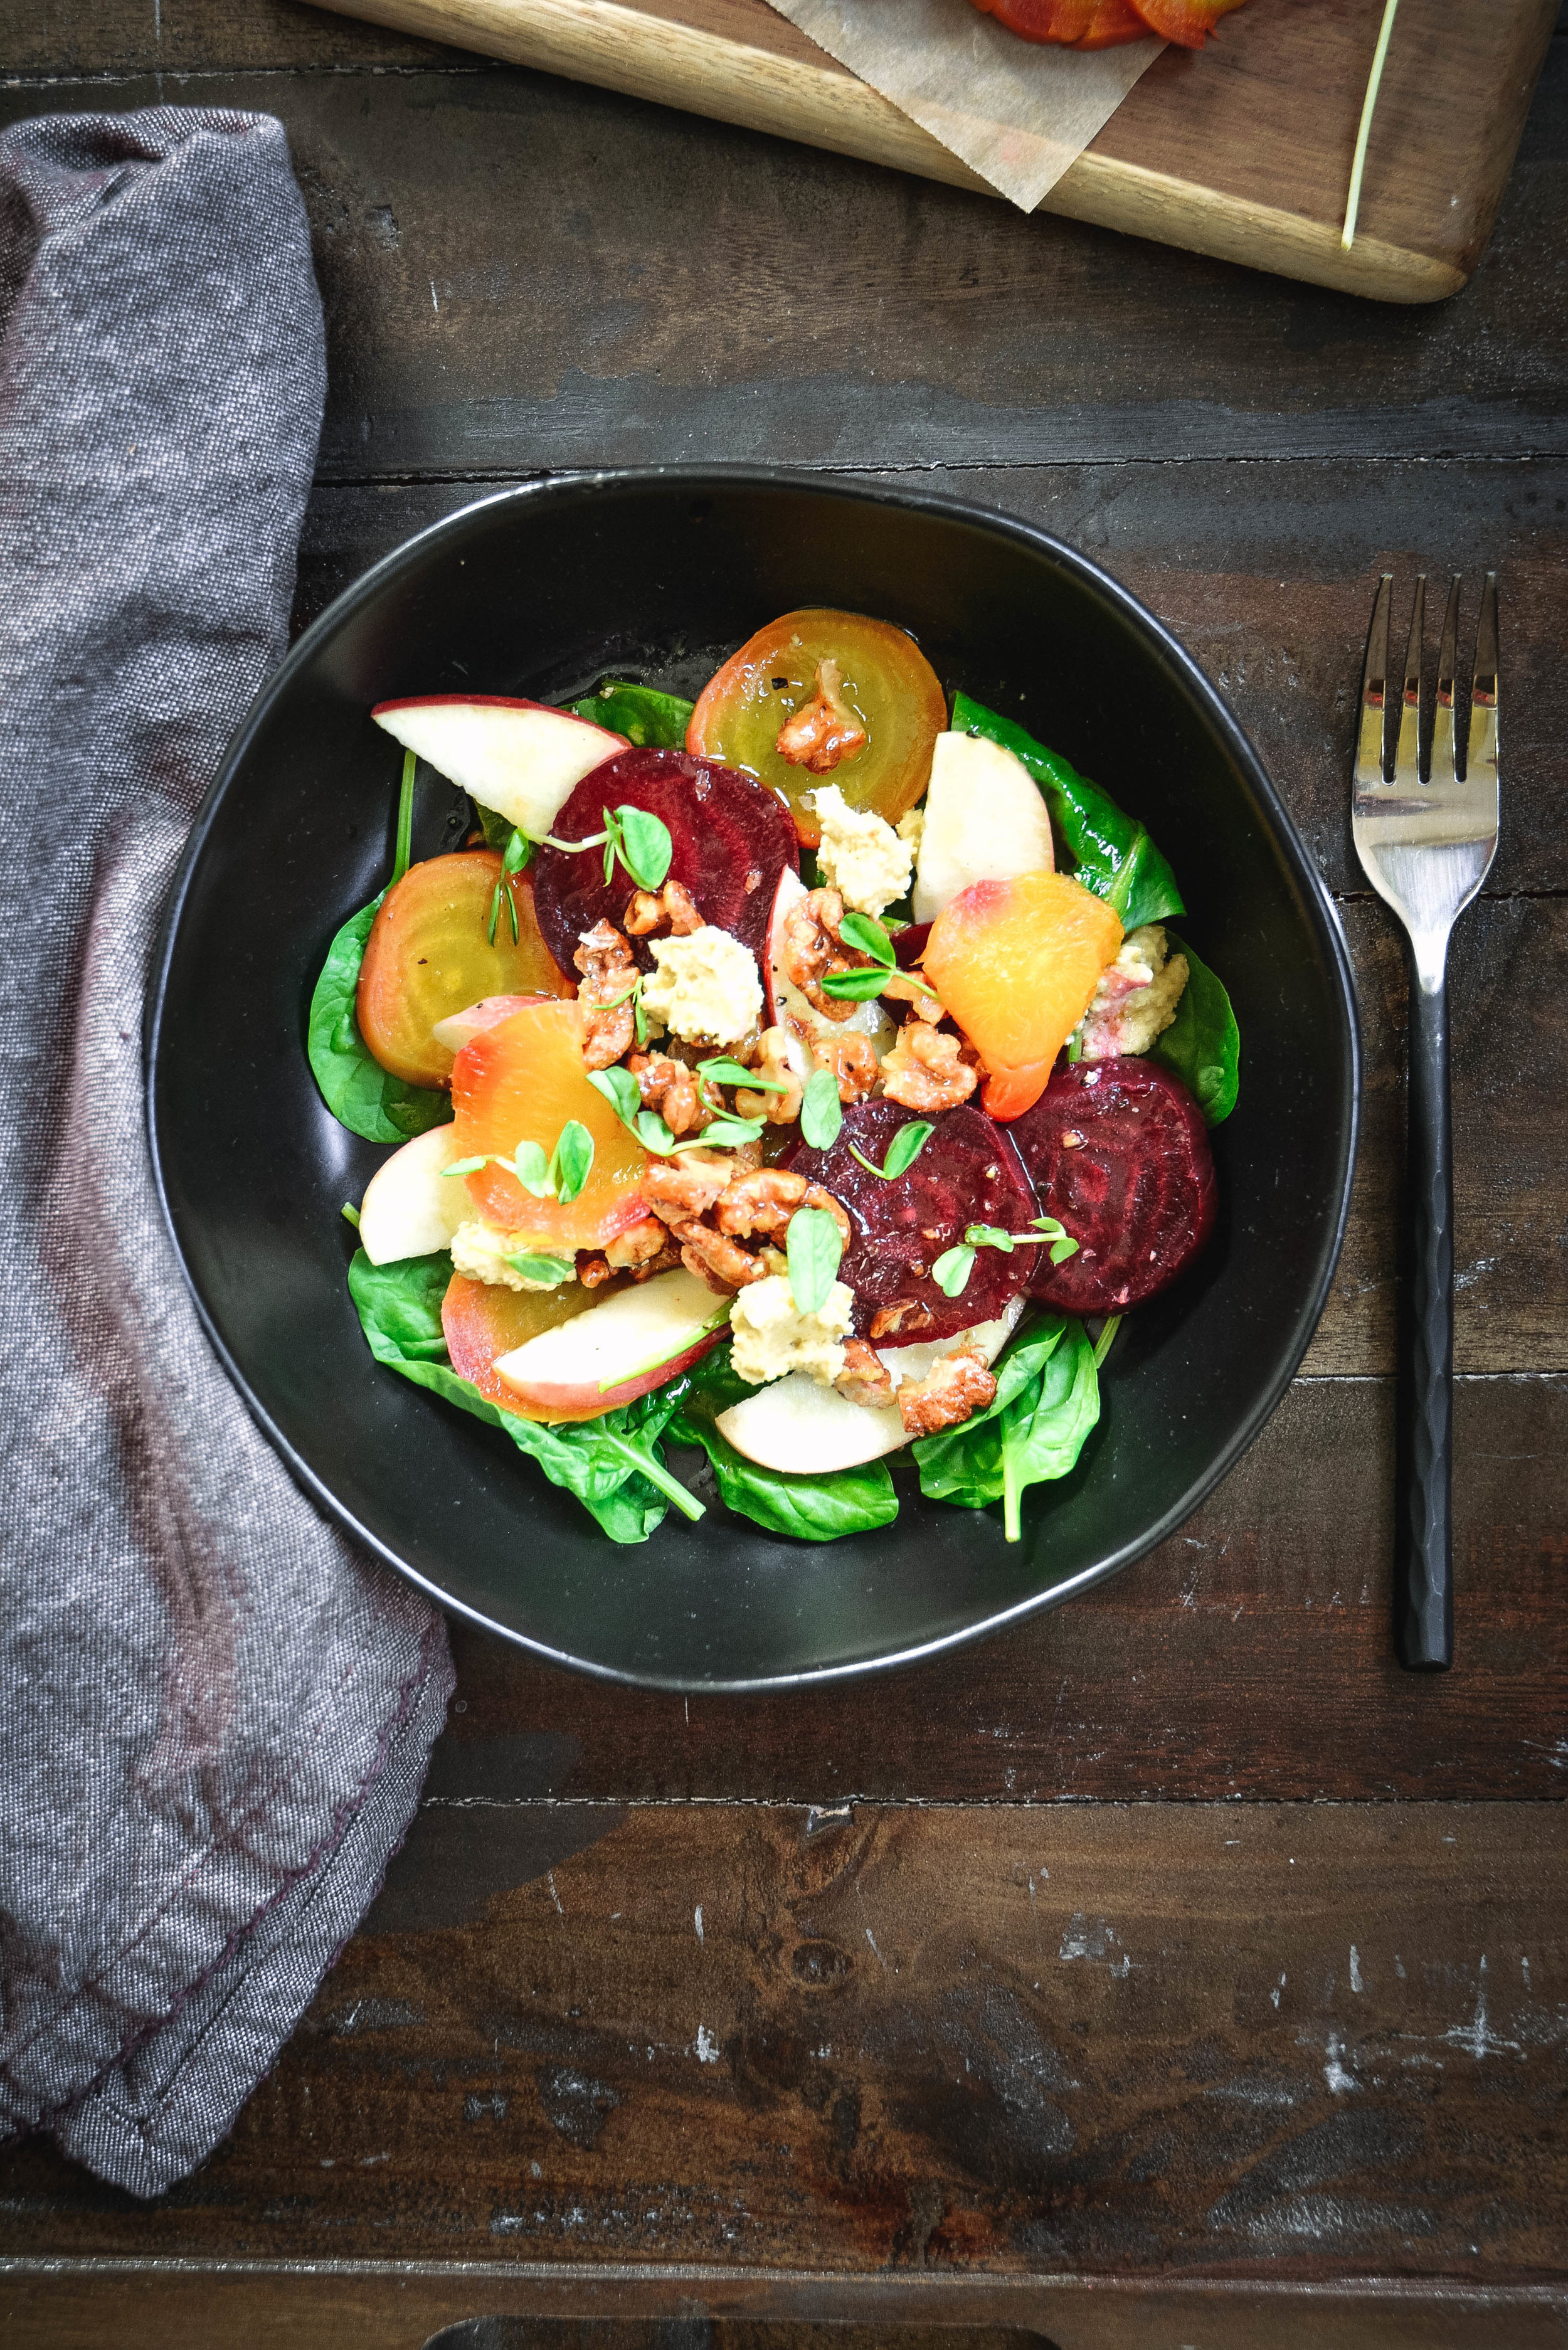  Make your tastebuds happy with this delicious and hearty roasted beet salad with apple, candied walnuts and cashew cheese. It's a fantastic combination that won't disappoint. If you're whole 30, you can still make this by simply using regular walnuts instead of candied. #salad, #fall, #beets, #apple, #calmeats, #vegan, #cashewcheese, #paleo, #whole30, #realfood, #glutenfree, #dairyfree, #dairyfreecheese, #paleocheese 